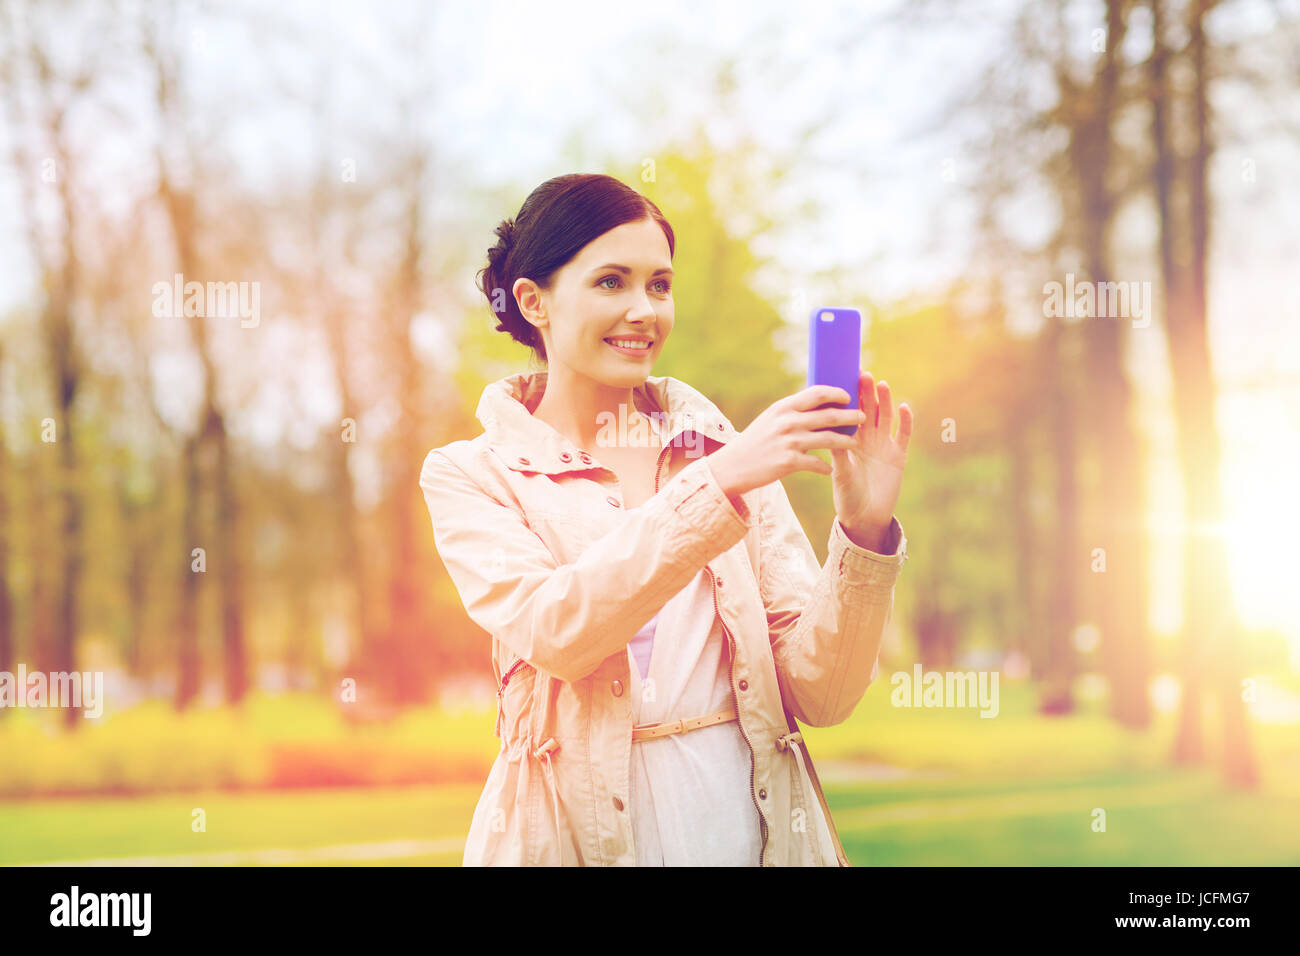 Smiling woman taking picture with smartphone Banque D'Images